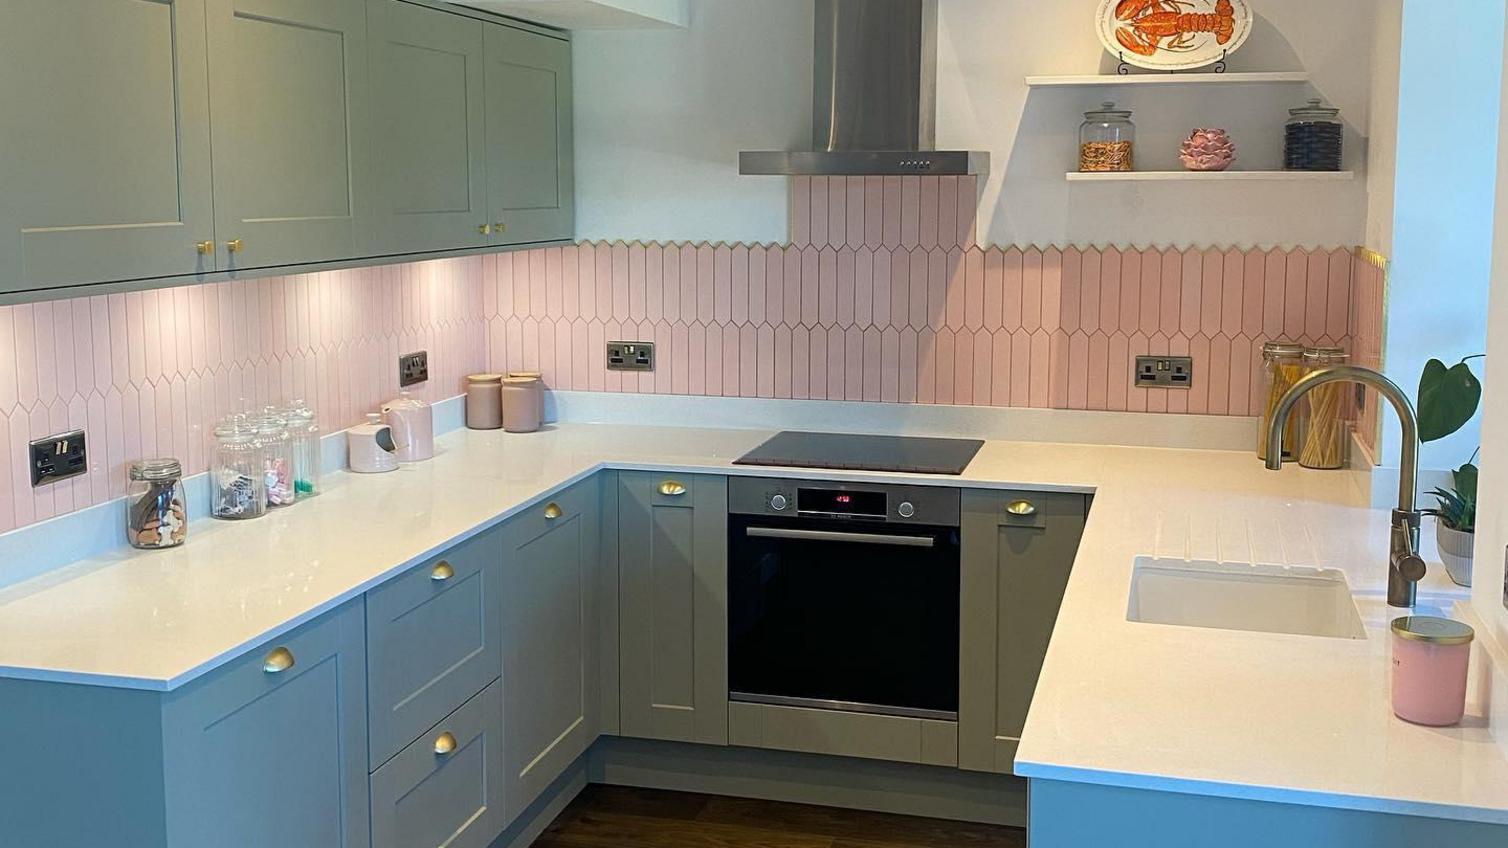 Light grey kitchen idea with shaker cupboards, brass cup and knob handles, a pink tiled backsplash and silver appliances.